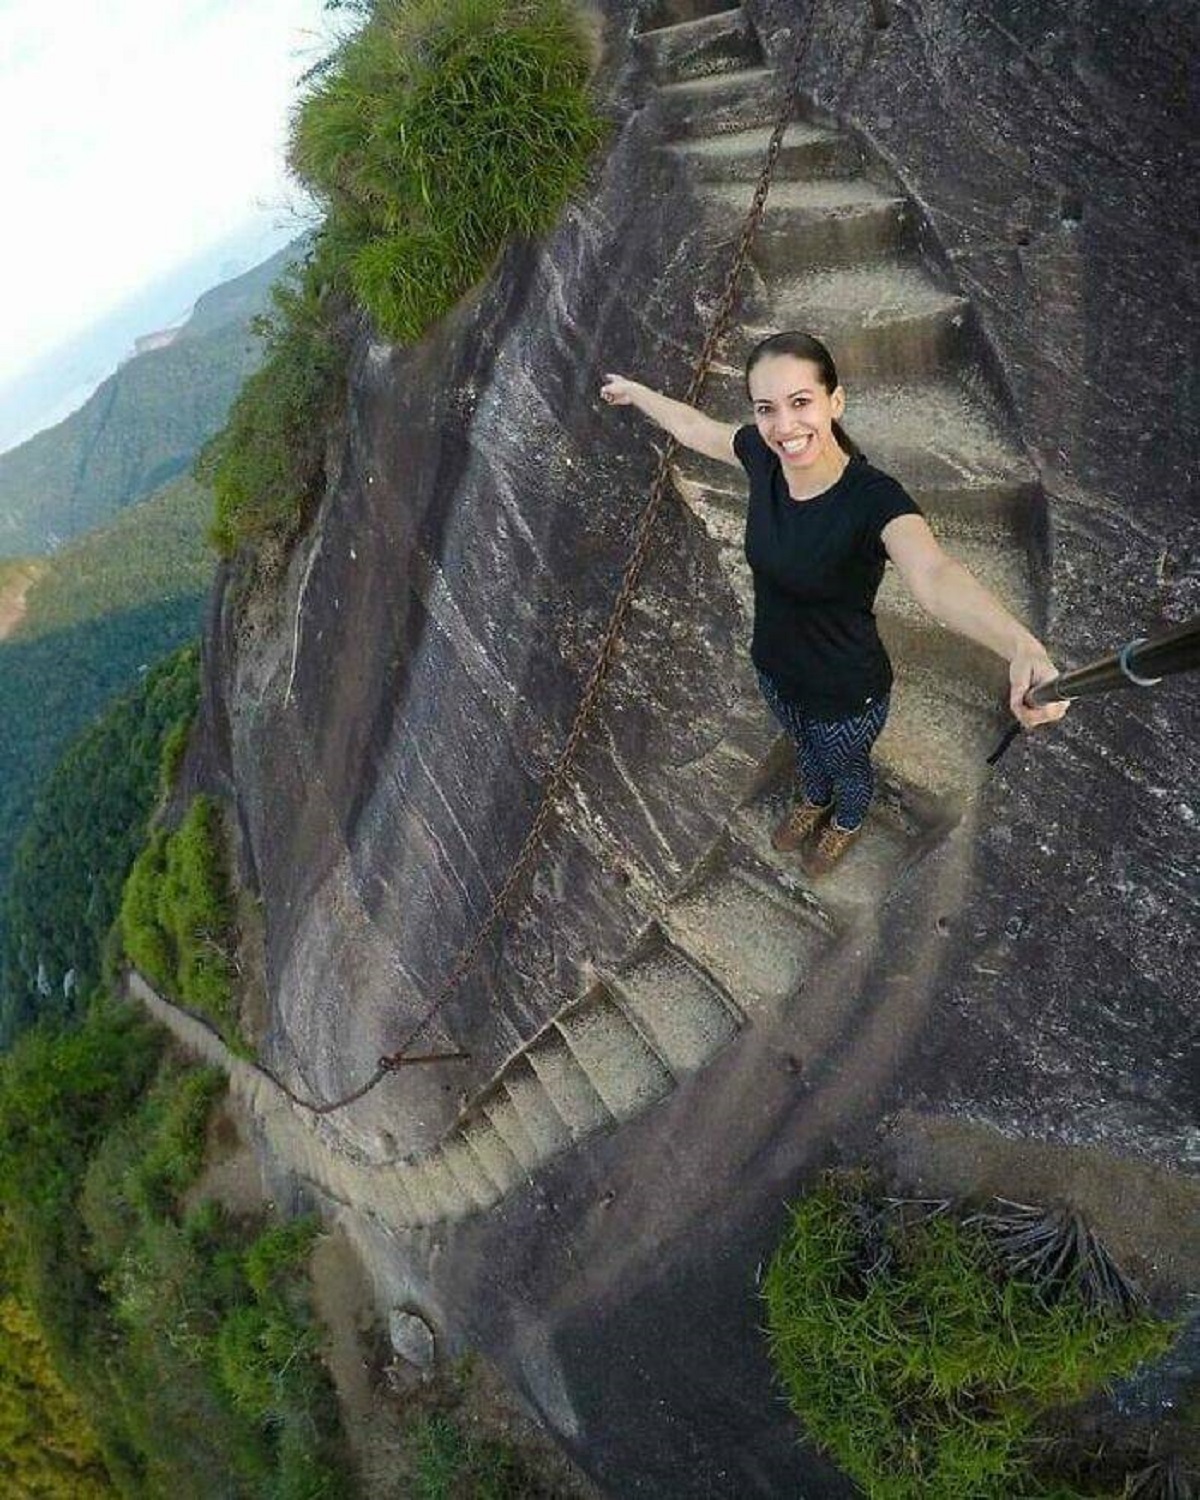 "On top of the stairs in Pico Tijuca, Brazil."